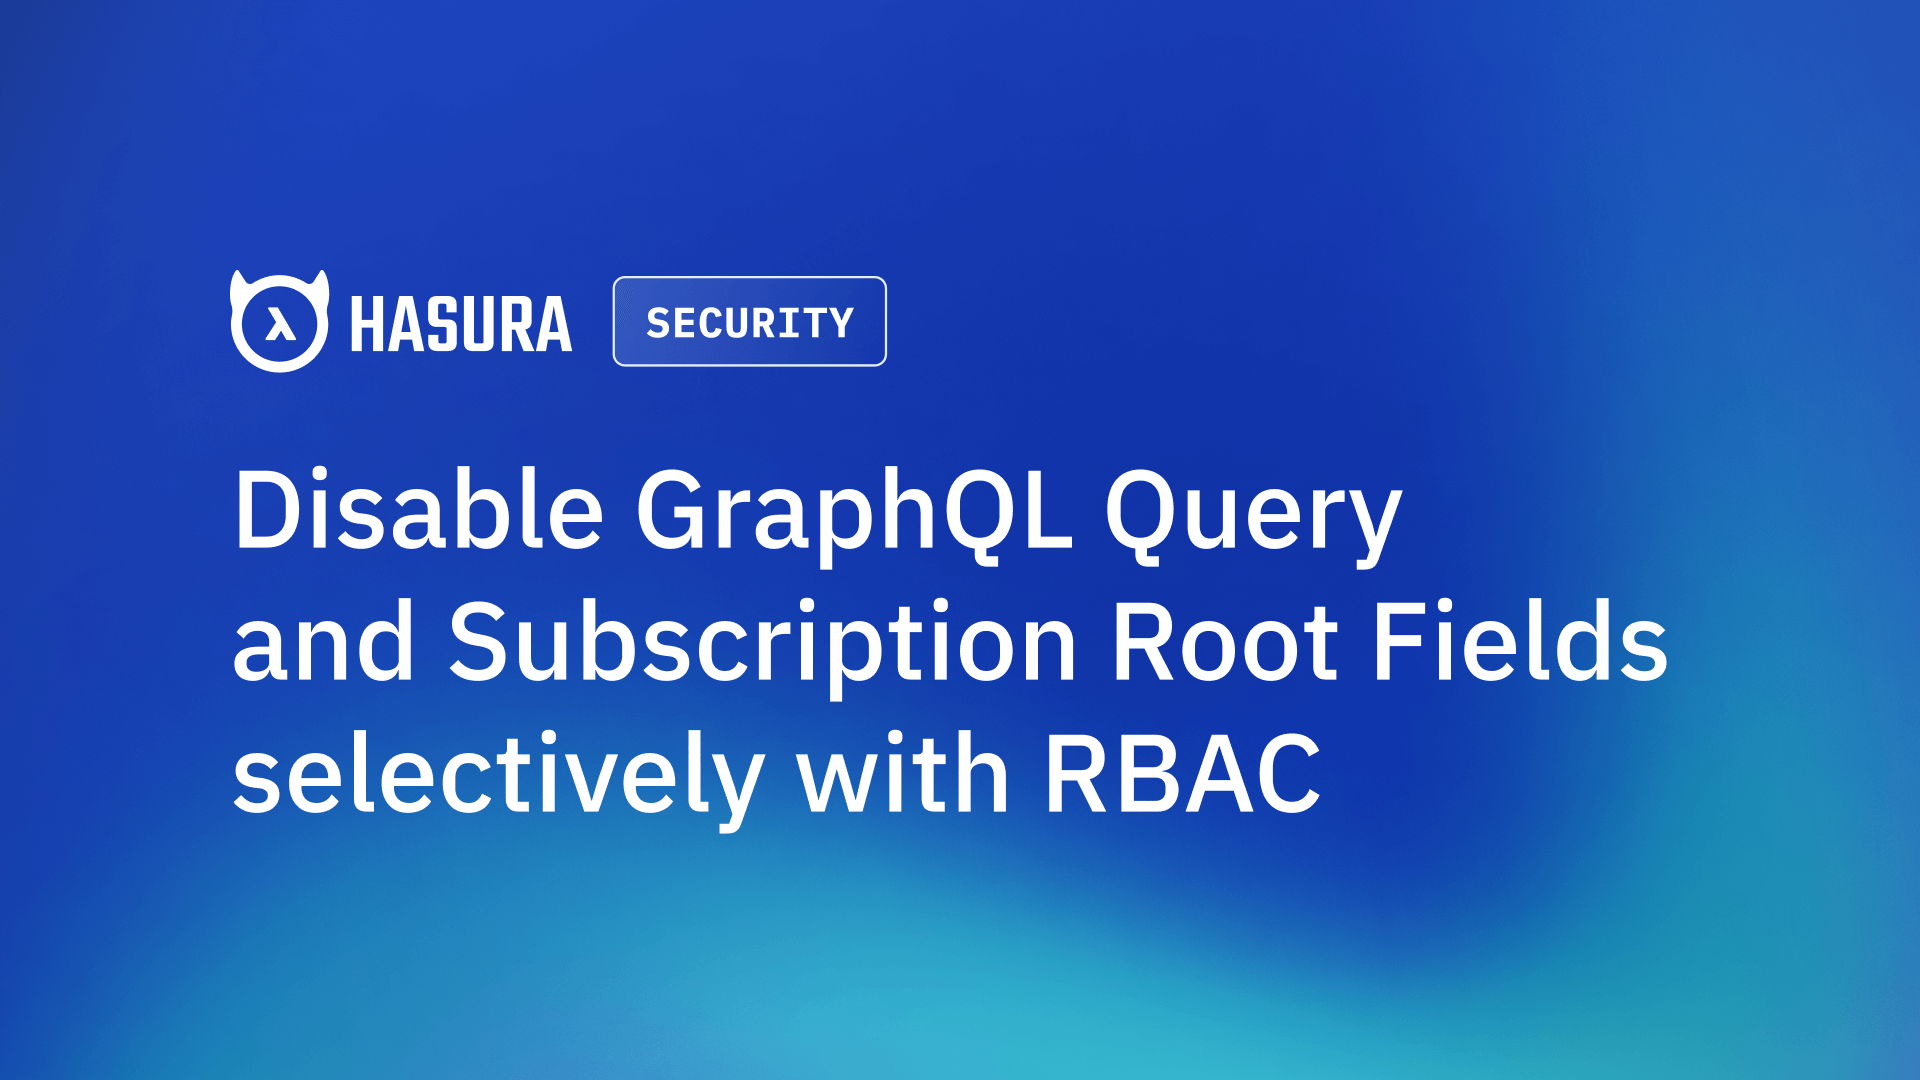 Disable GraphQL Query and Subscription Root Fields selectively with RBAC